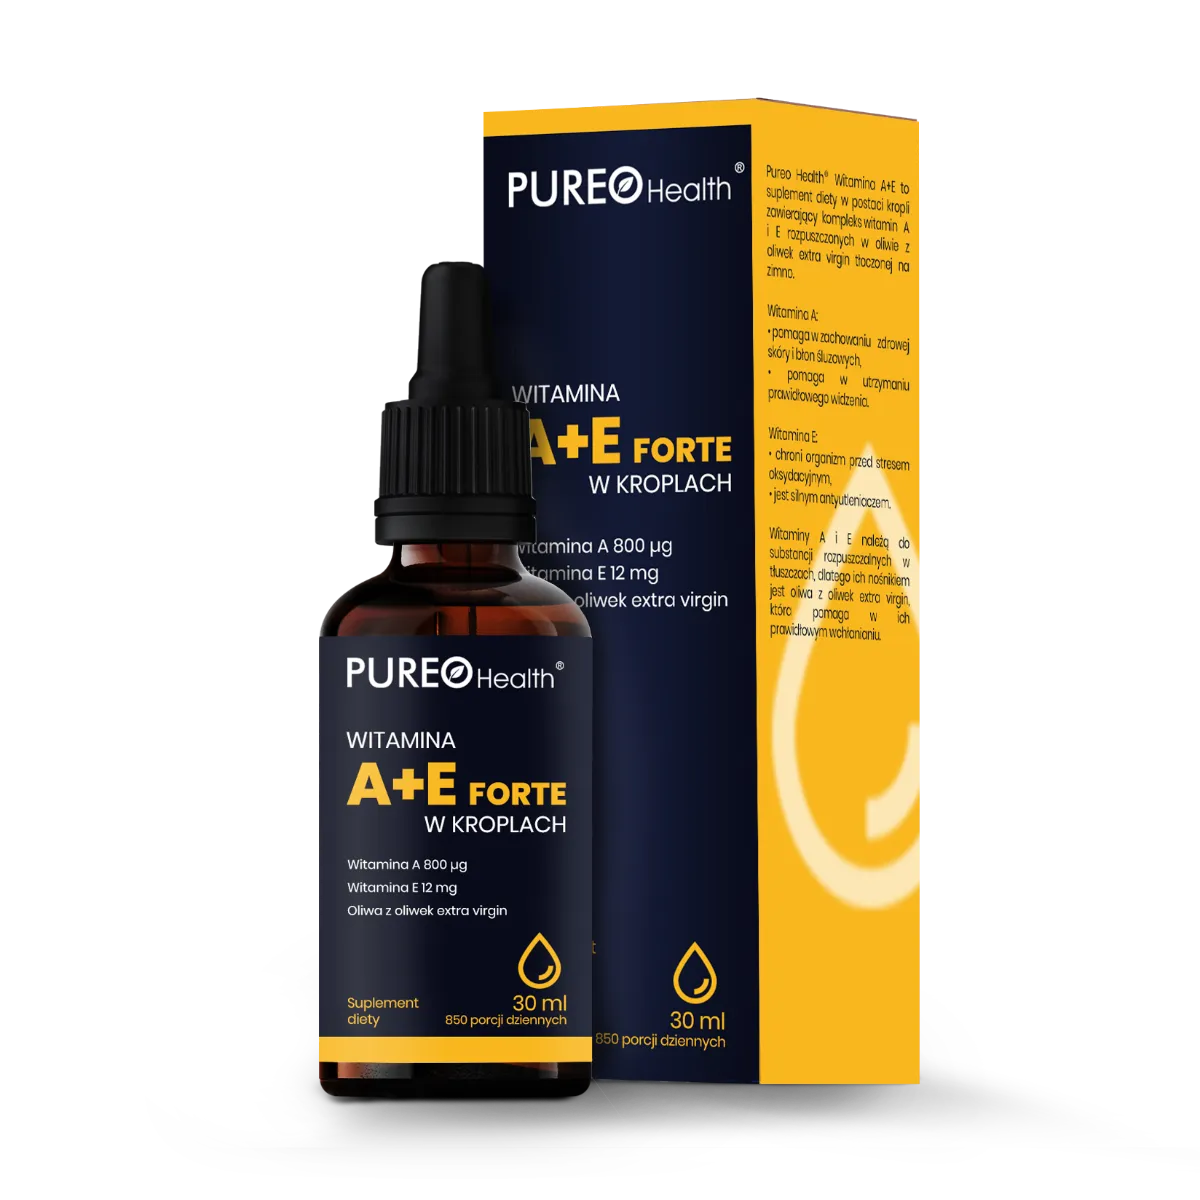 Pureo Health Witamina A+E Forte suplement diety krople, 30 ml